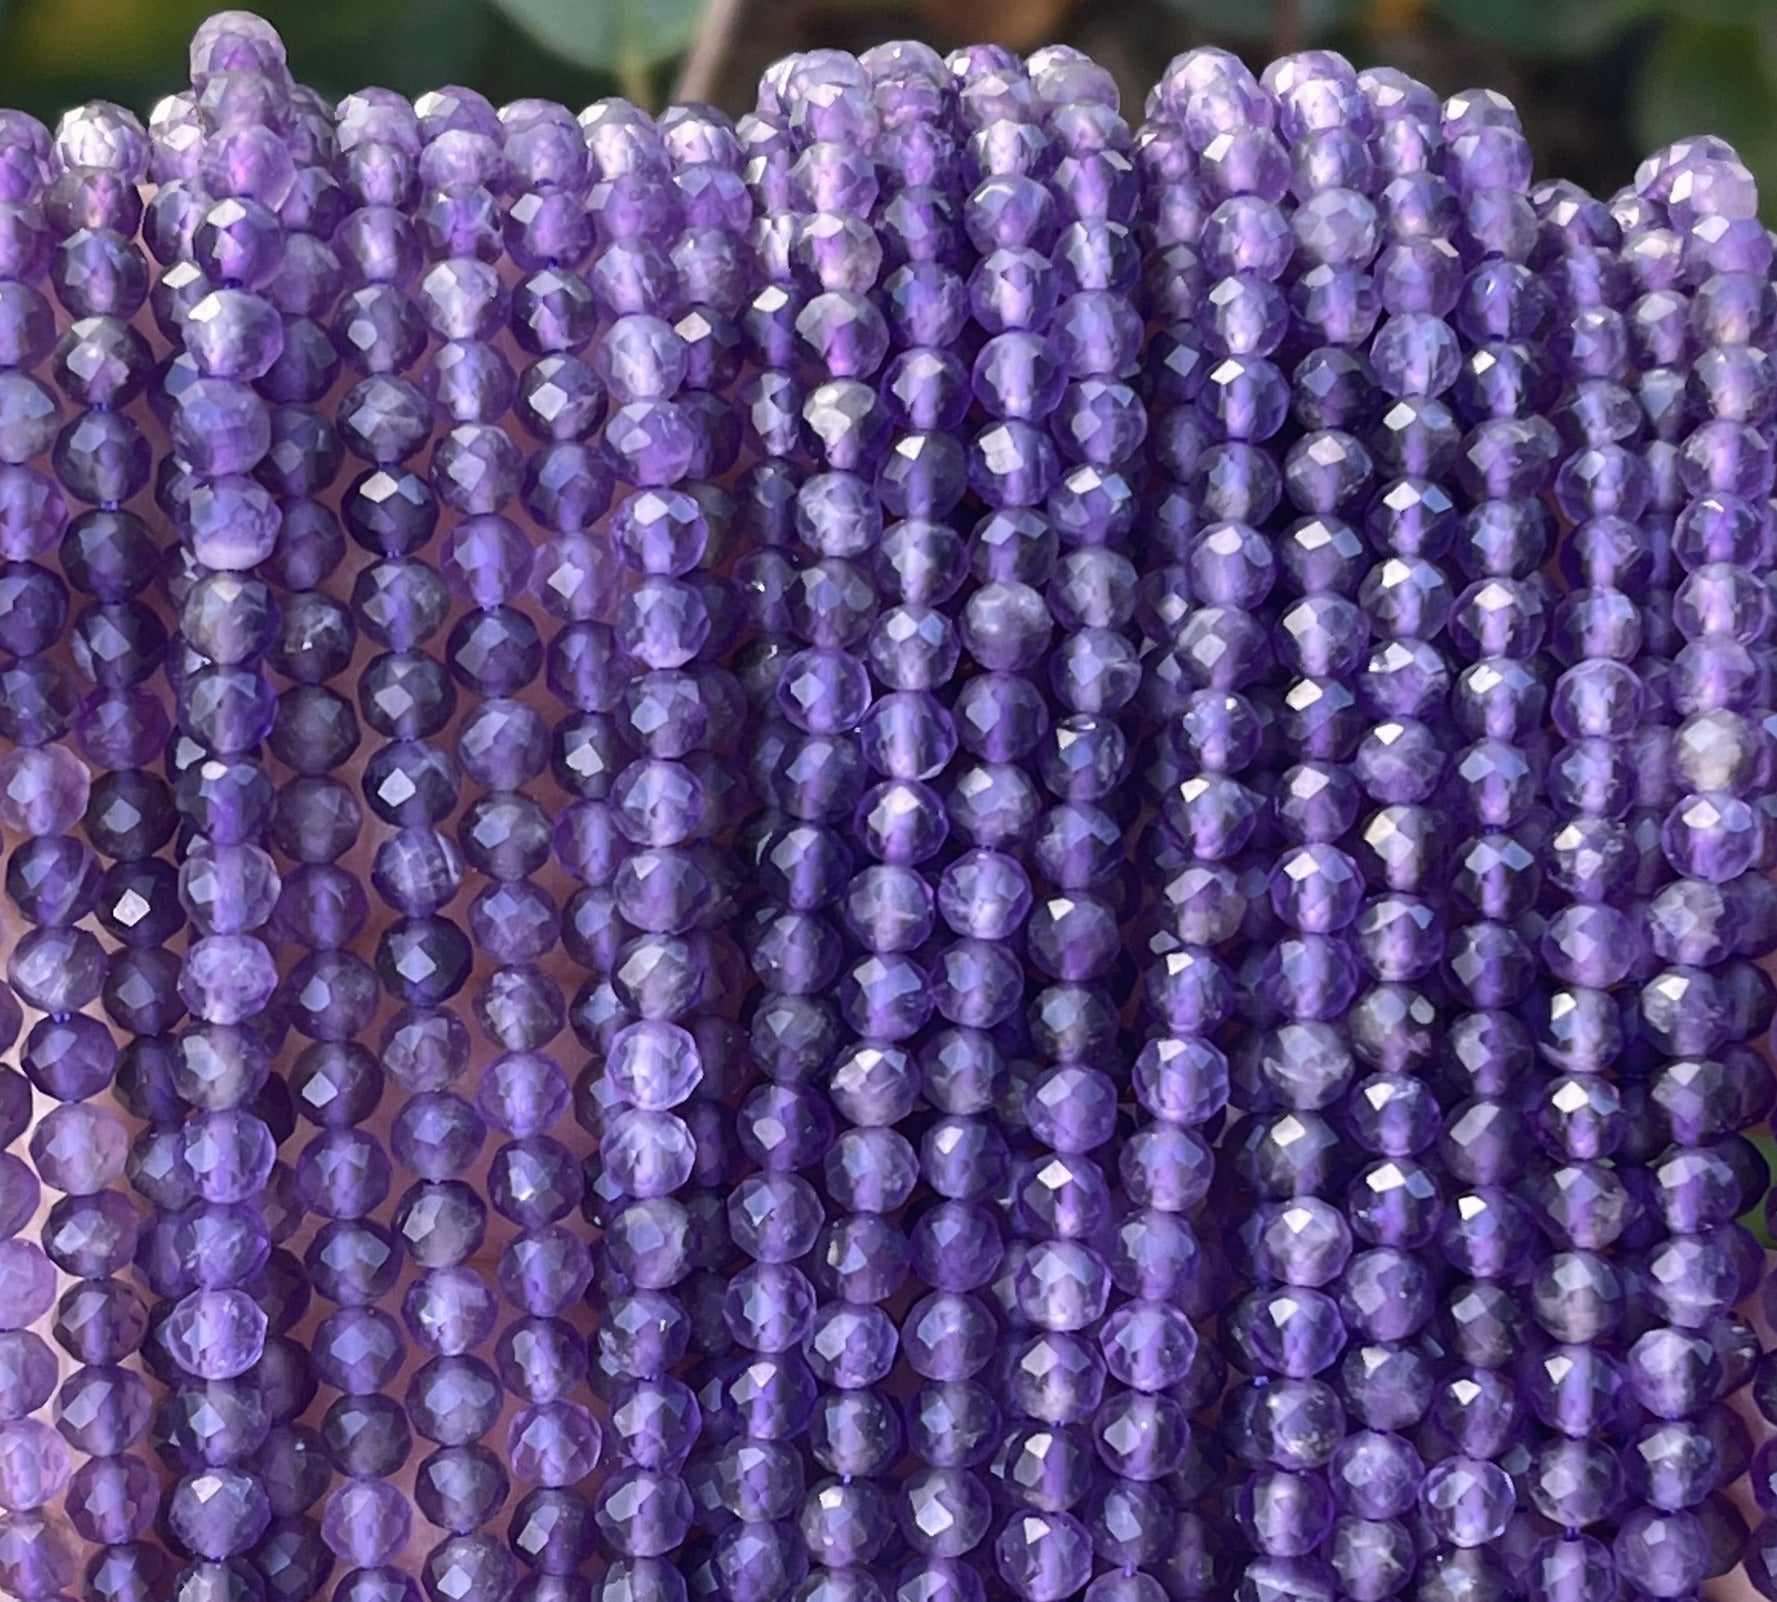 Amethyst 4mm faceted round natural gemstone beads 15.5" strand